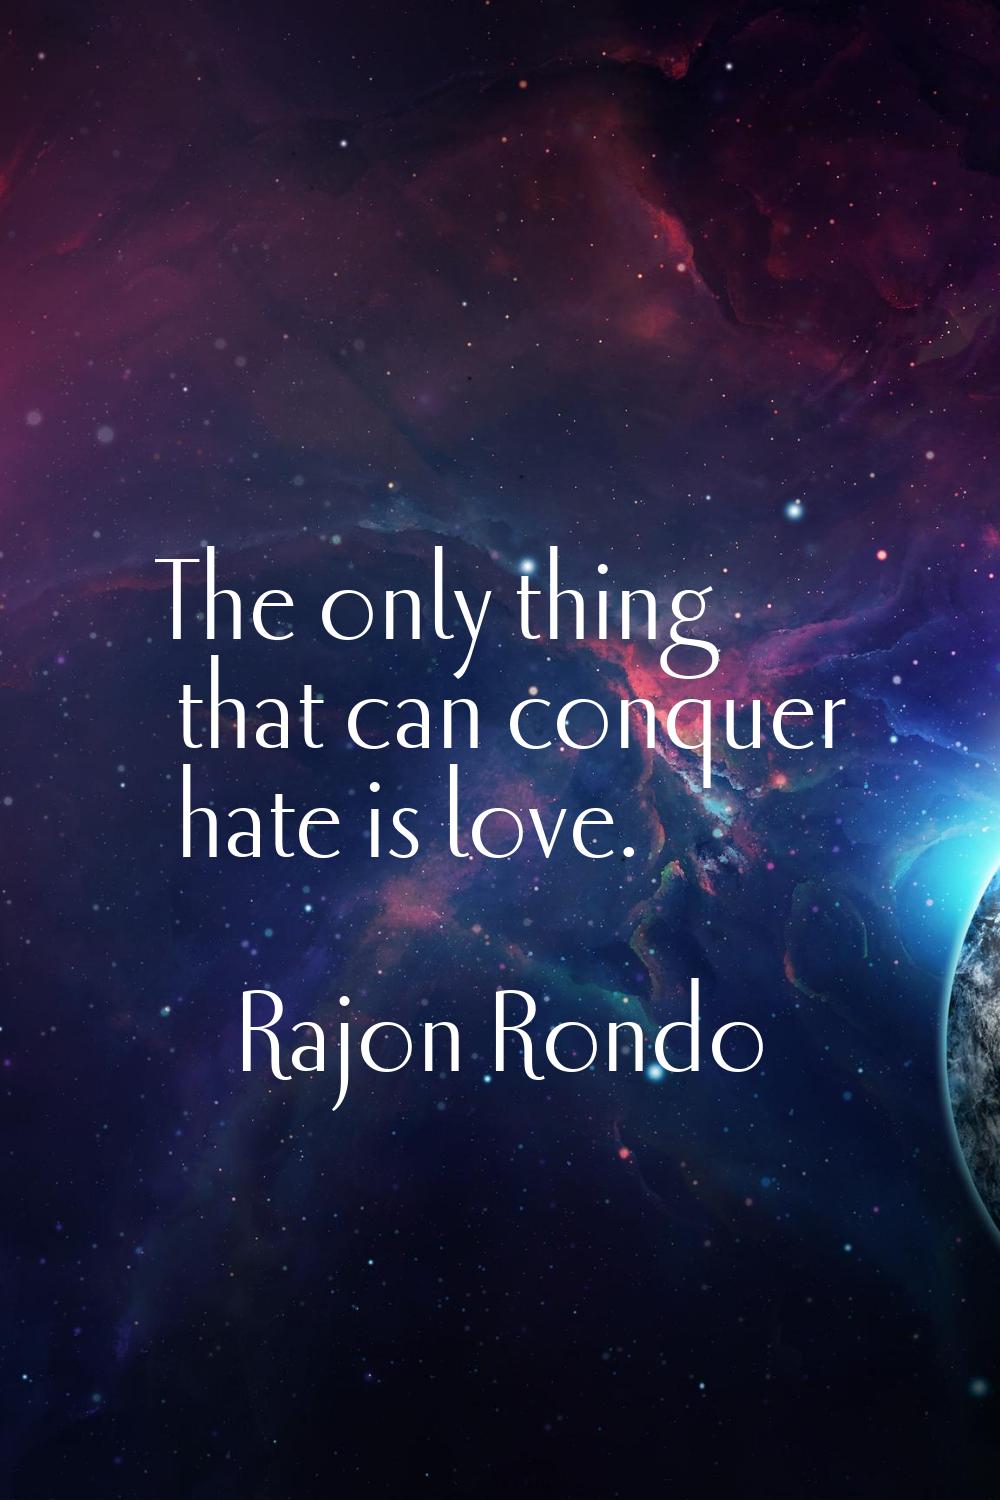 The only thing that can conquer hate is love.